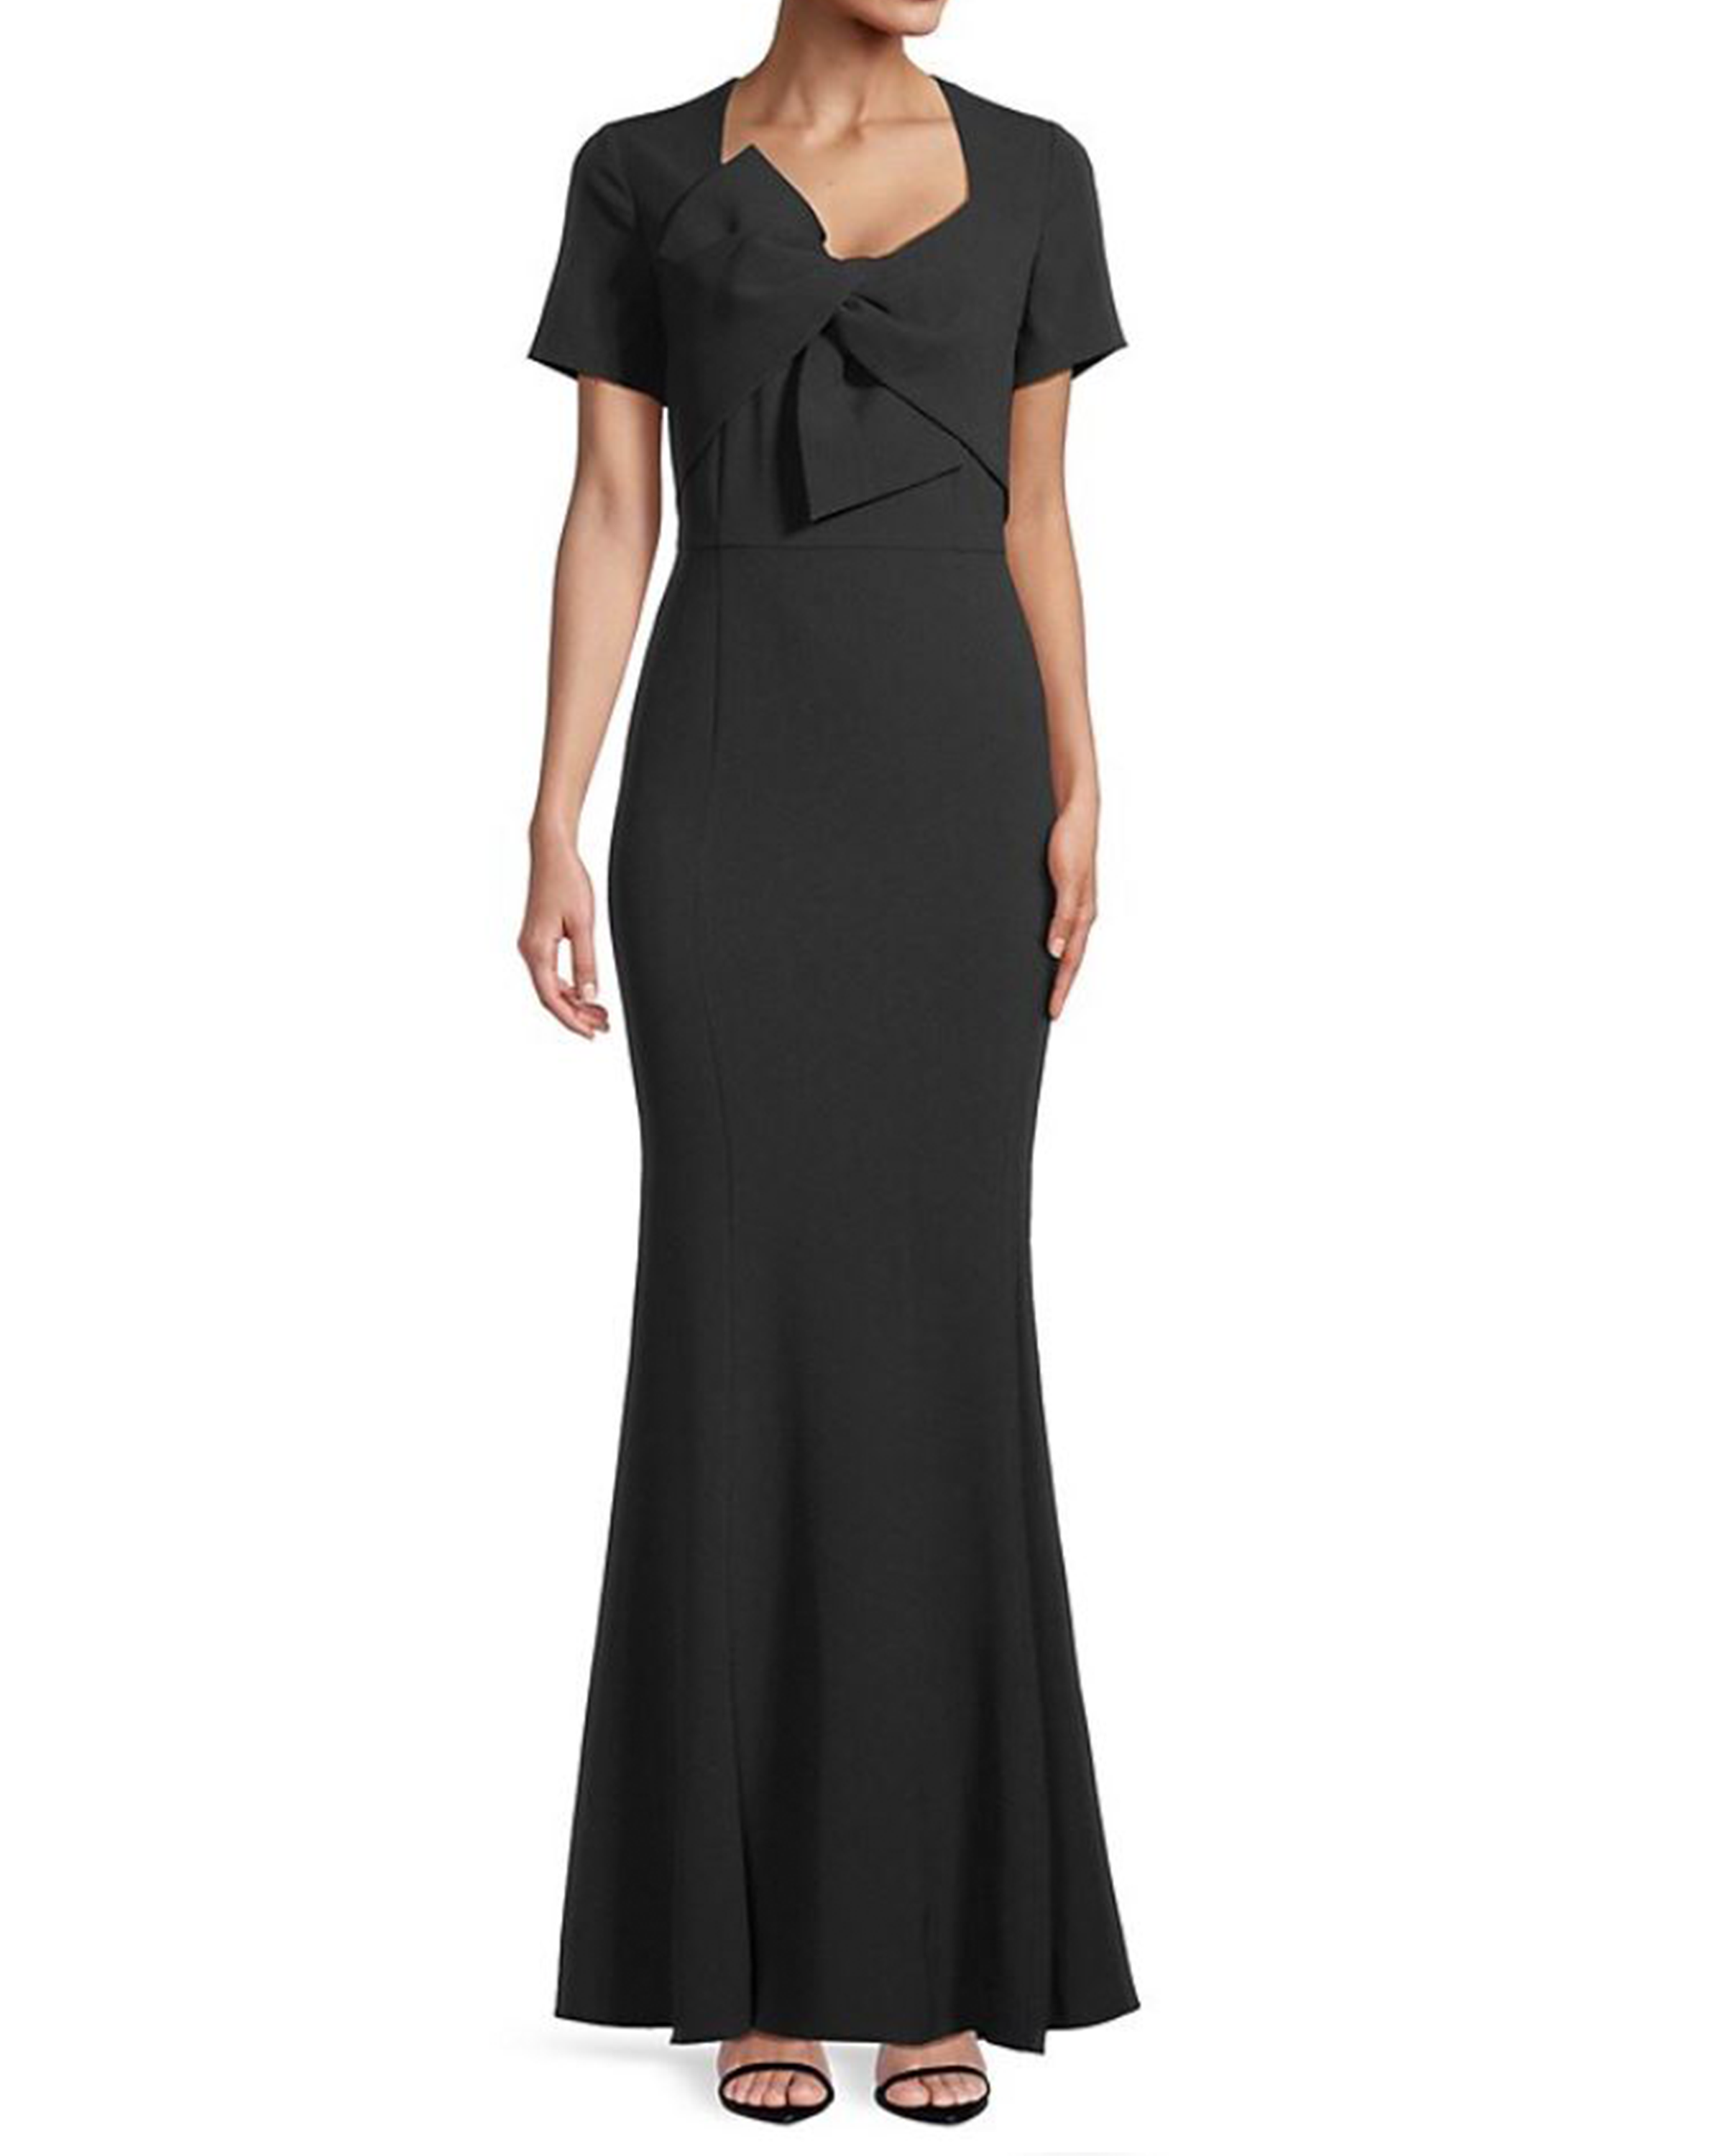 Bow Detail Crepe Gown in Black